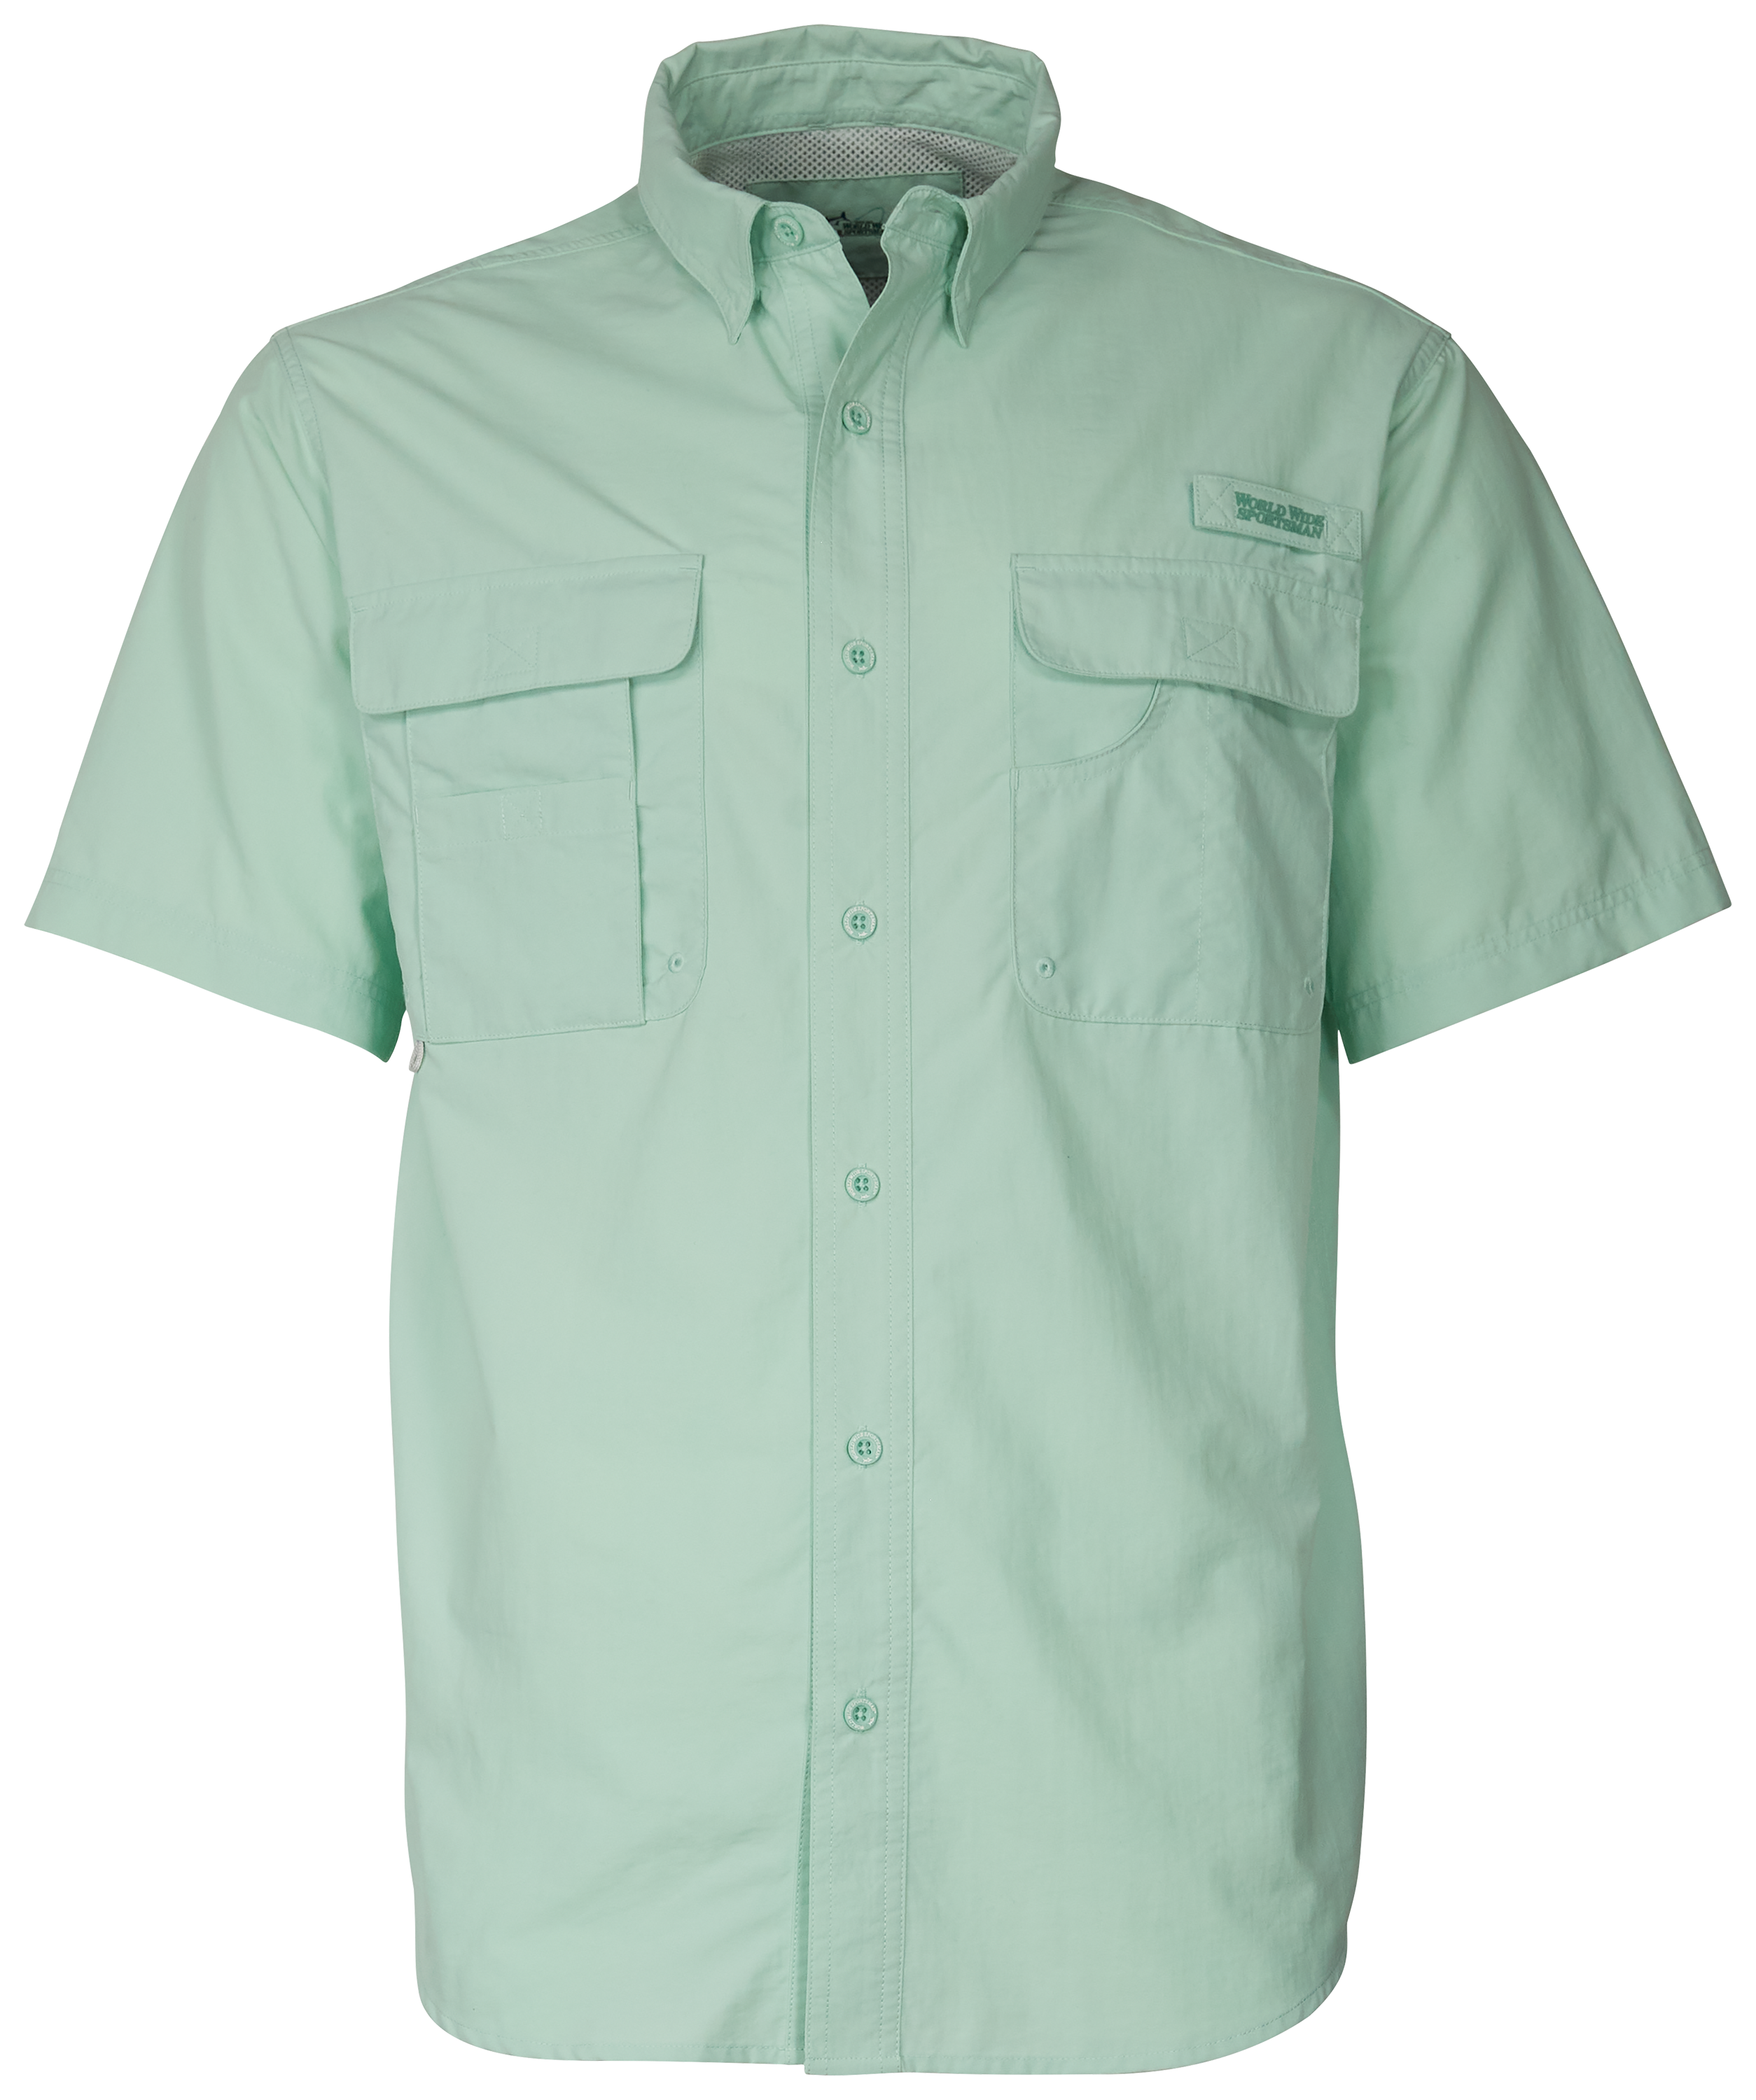 World Wide Sportsman Recycled-Nylon Angler 2.0 Short-Sleeve Button-Down Shirt for Men - Lichen - M